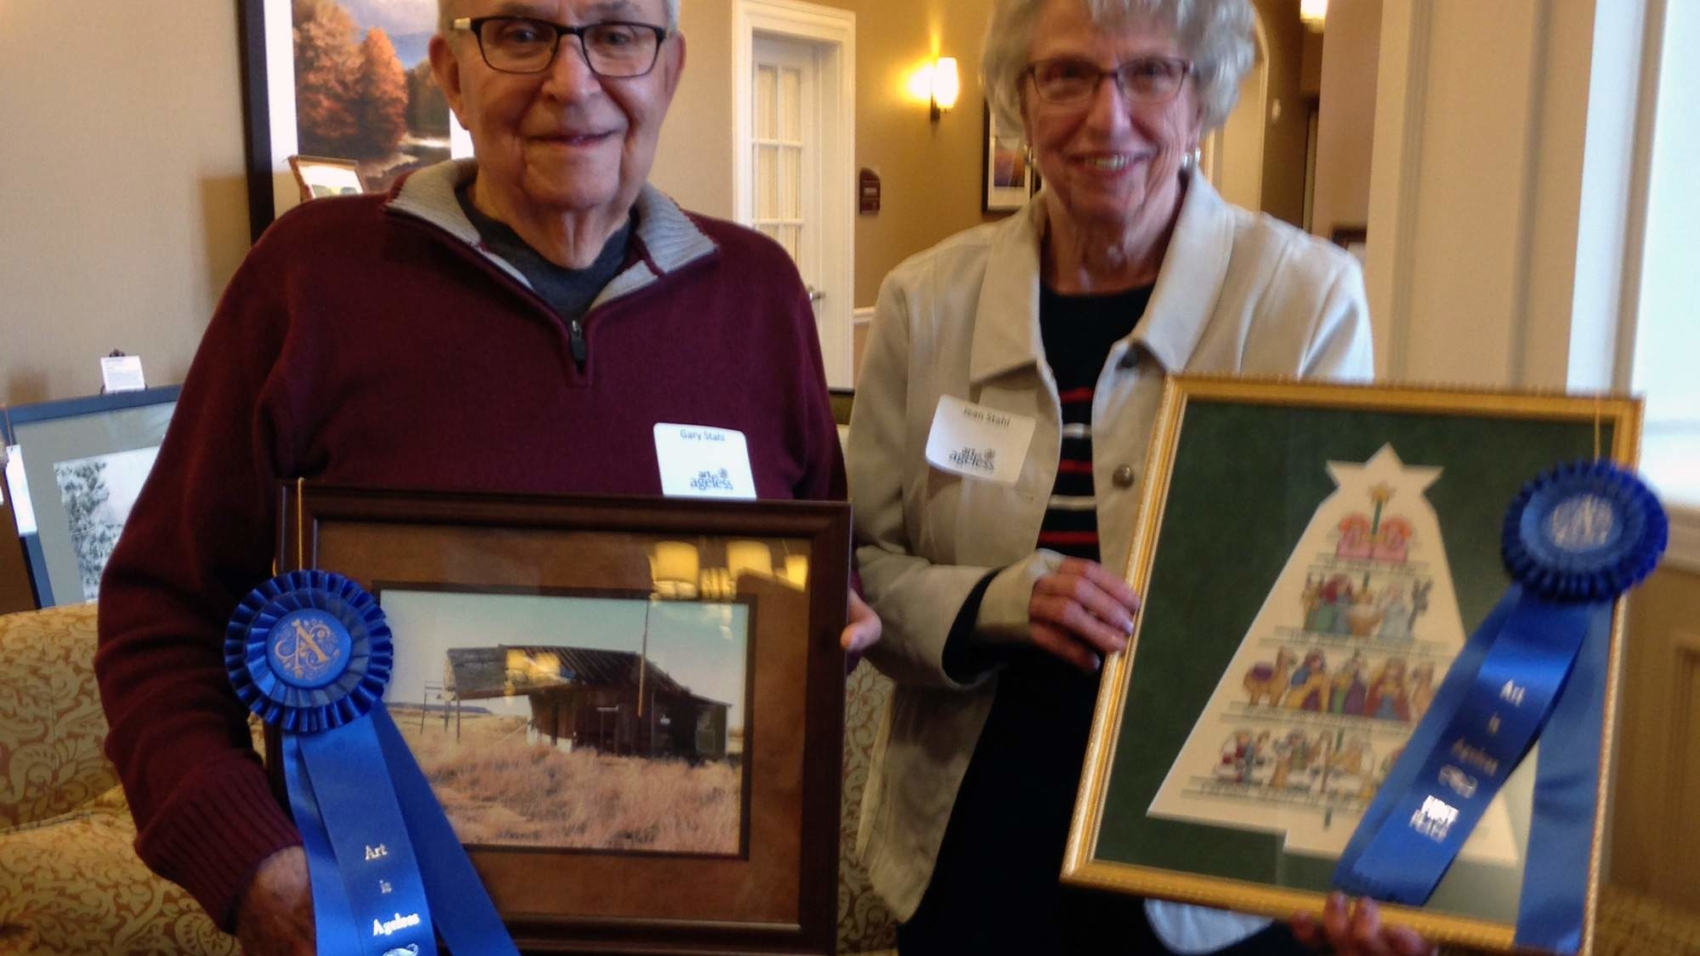 Gary and Jean Stahl took home blue ribbons in the photography and Christmas categories.